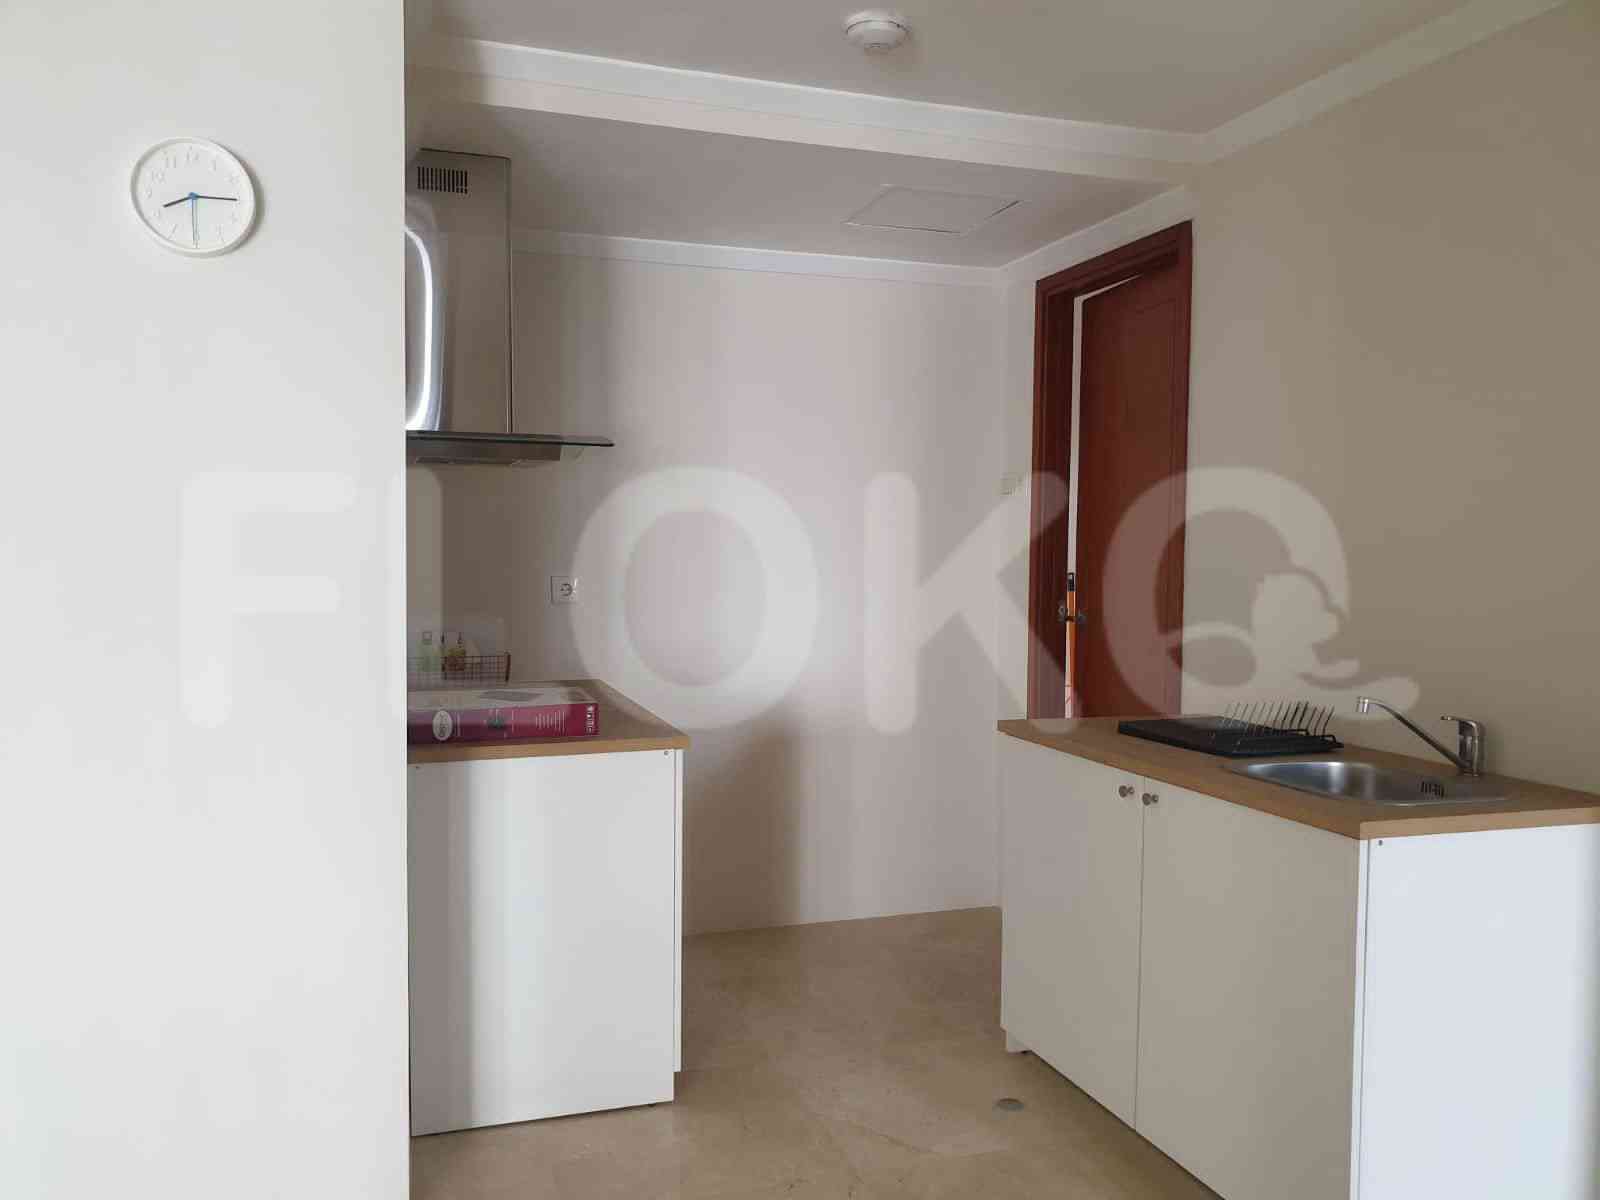 3 Bedroom on 21st Floor for Rent in Poins Square Apartment - fle361 6